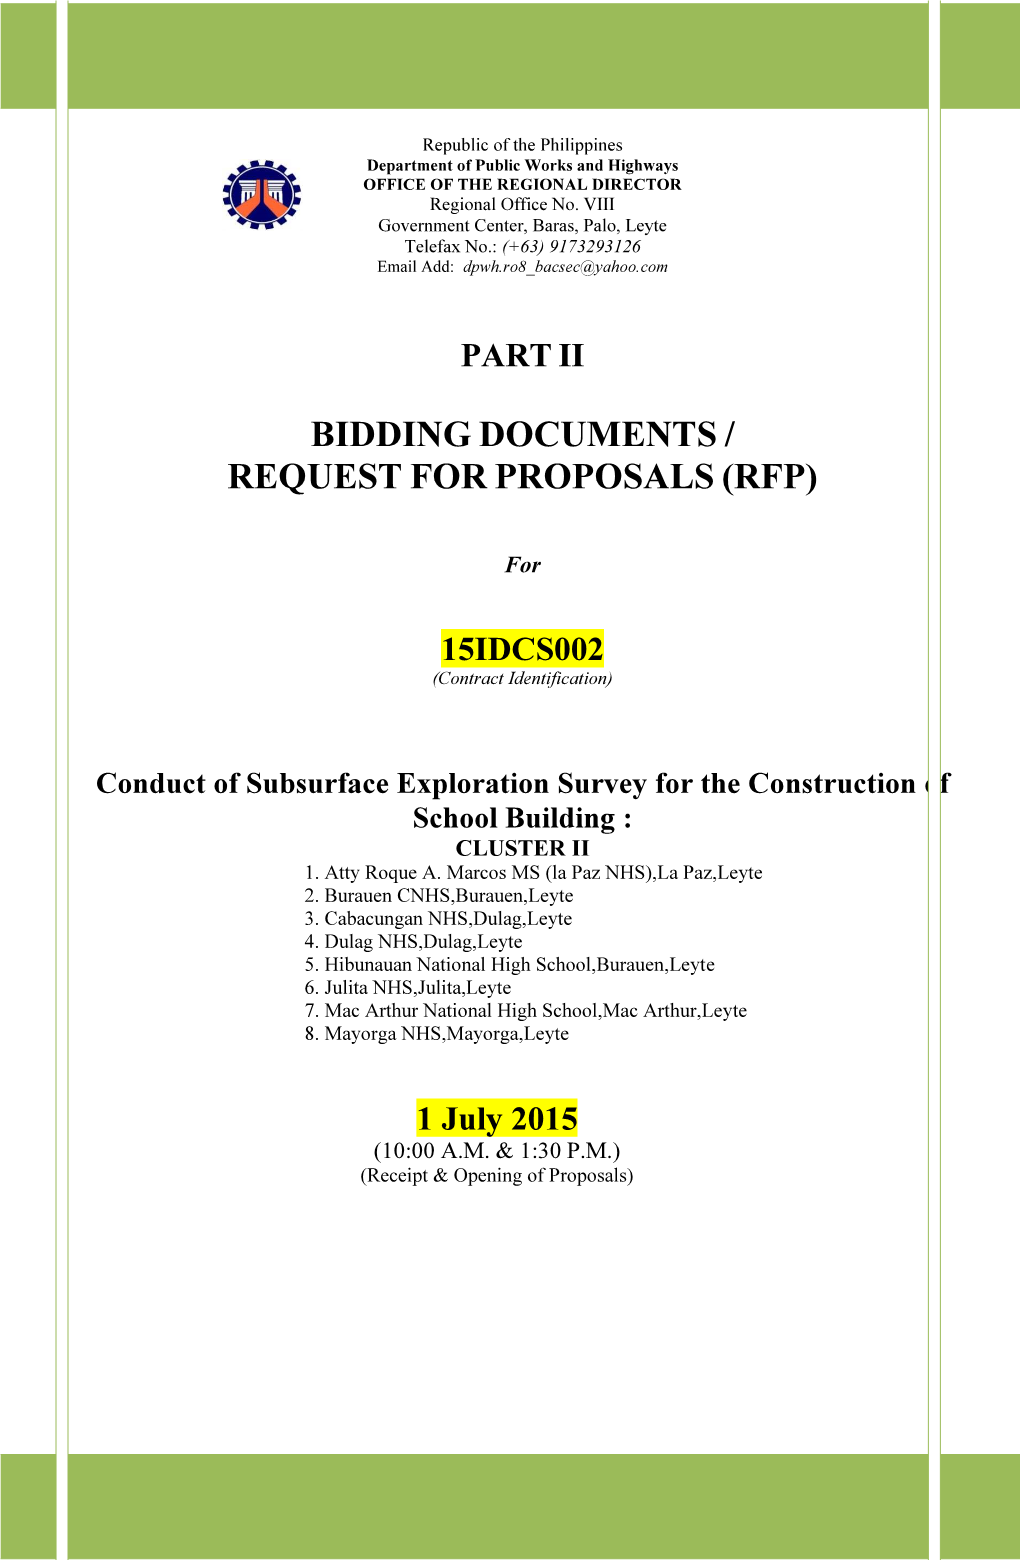 Bidding Documents / Request for Proposals (Rfp)